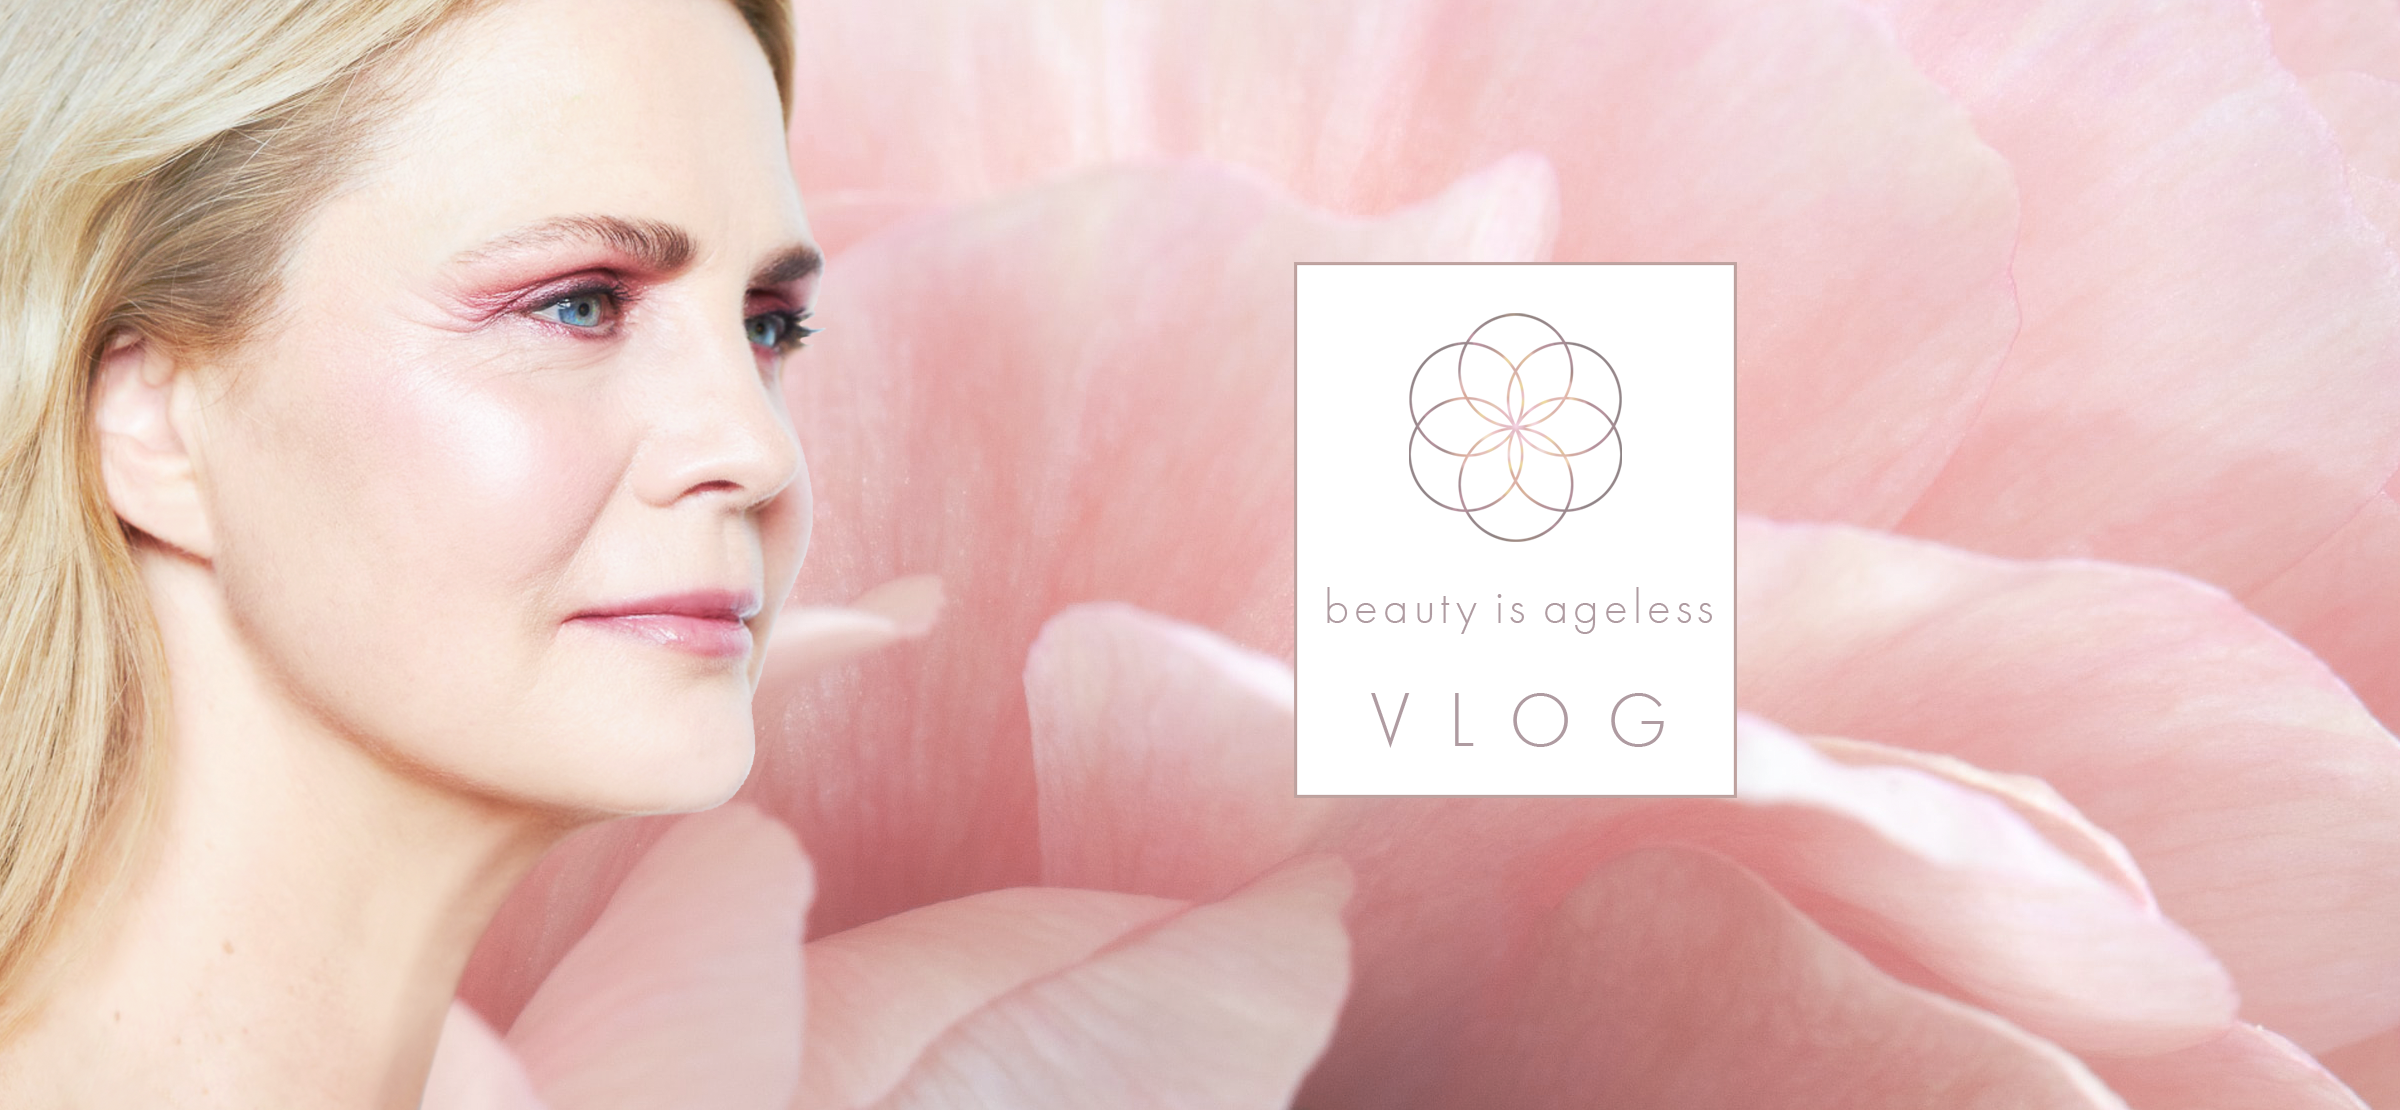 dawn+gallagher+banner+beauty+is+ageless+vlog+page+smaller+v1.png